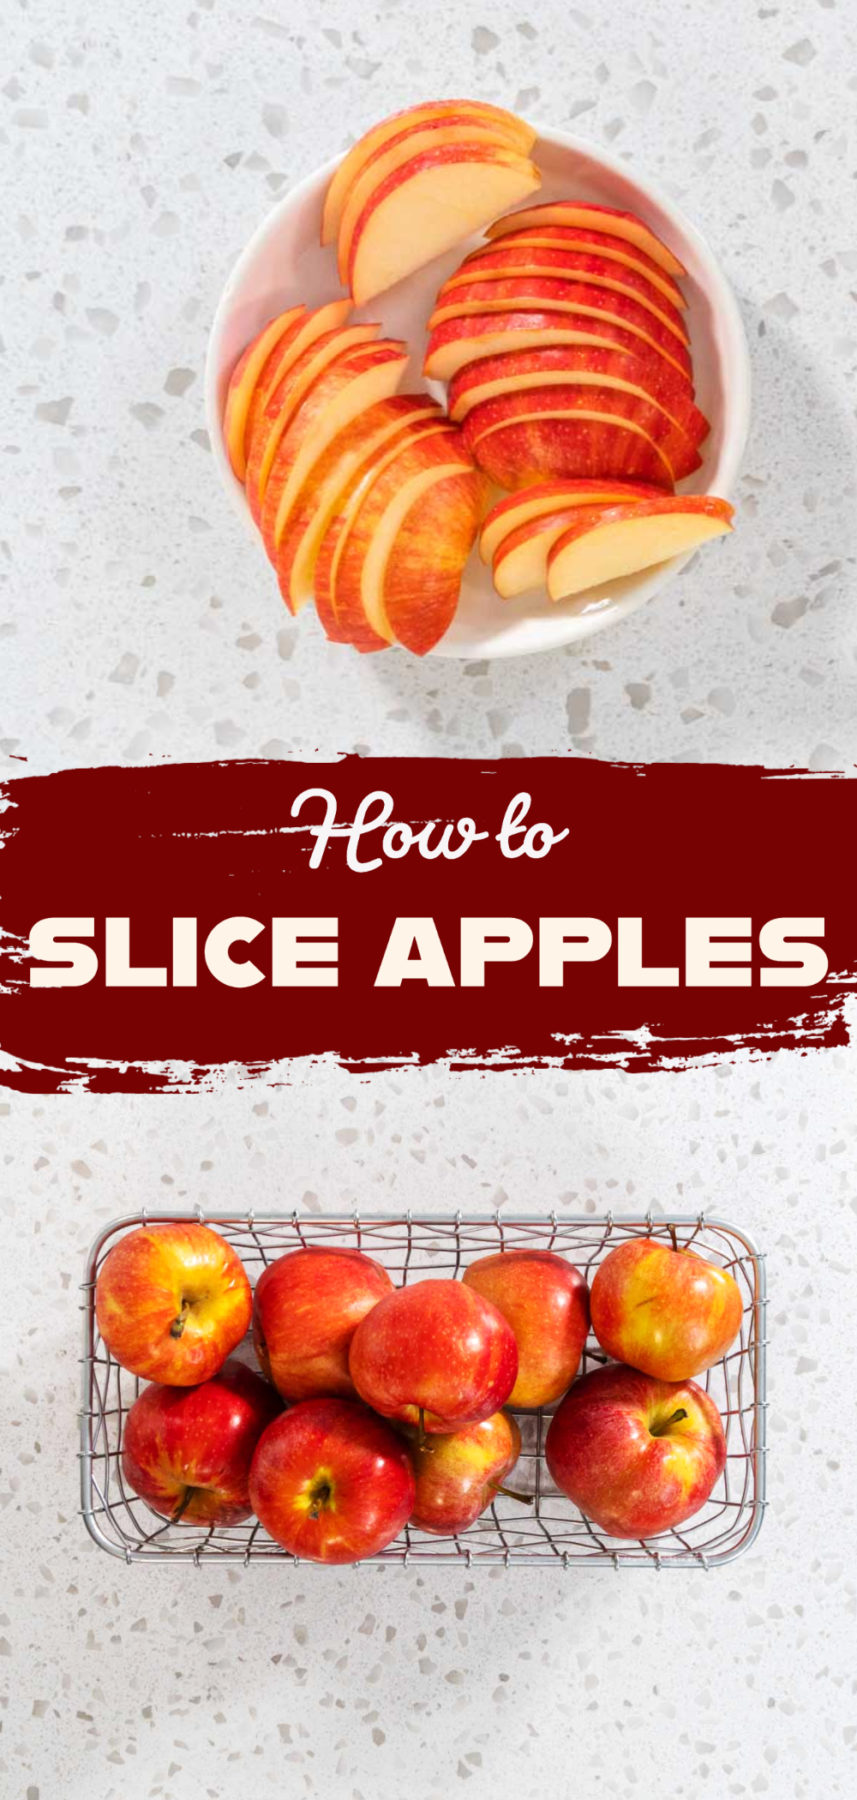 How to slice apples